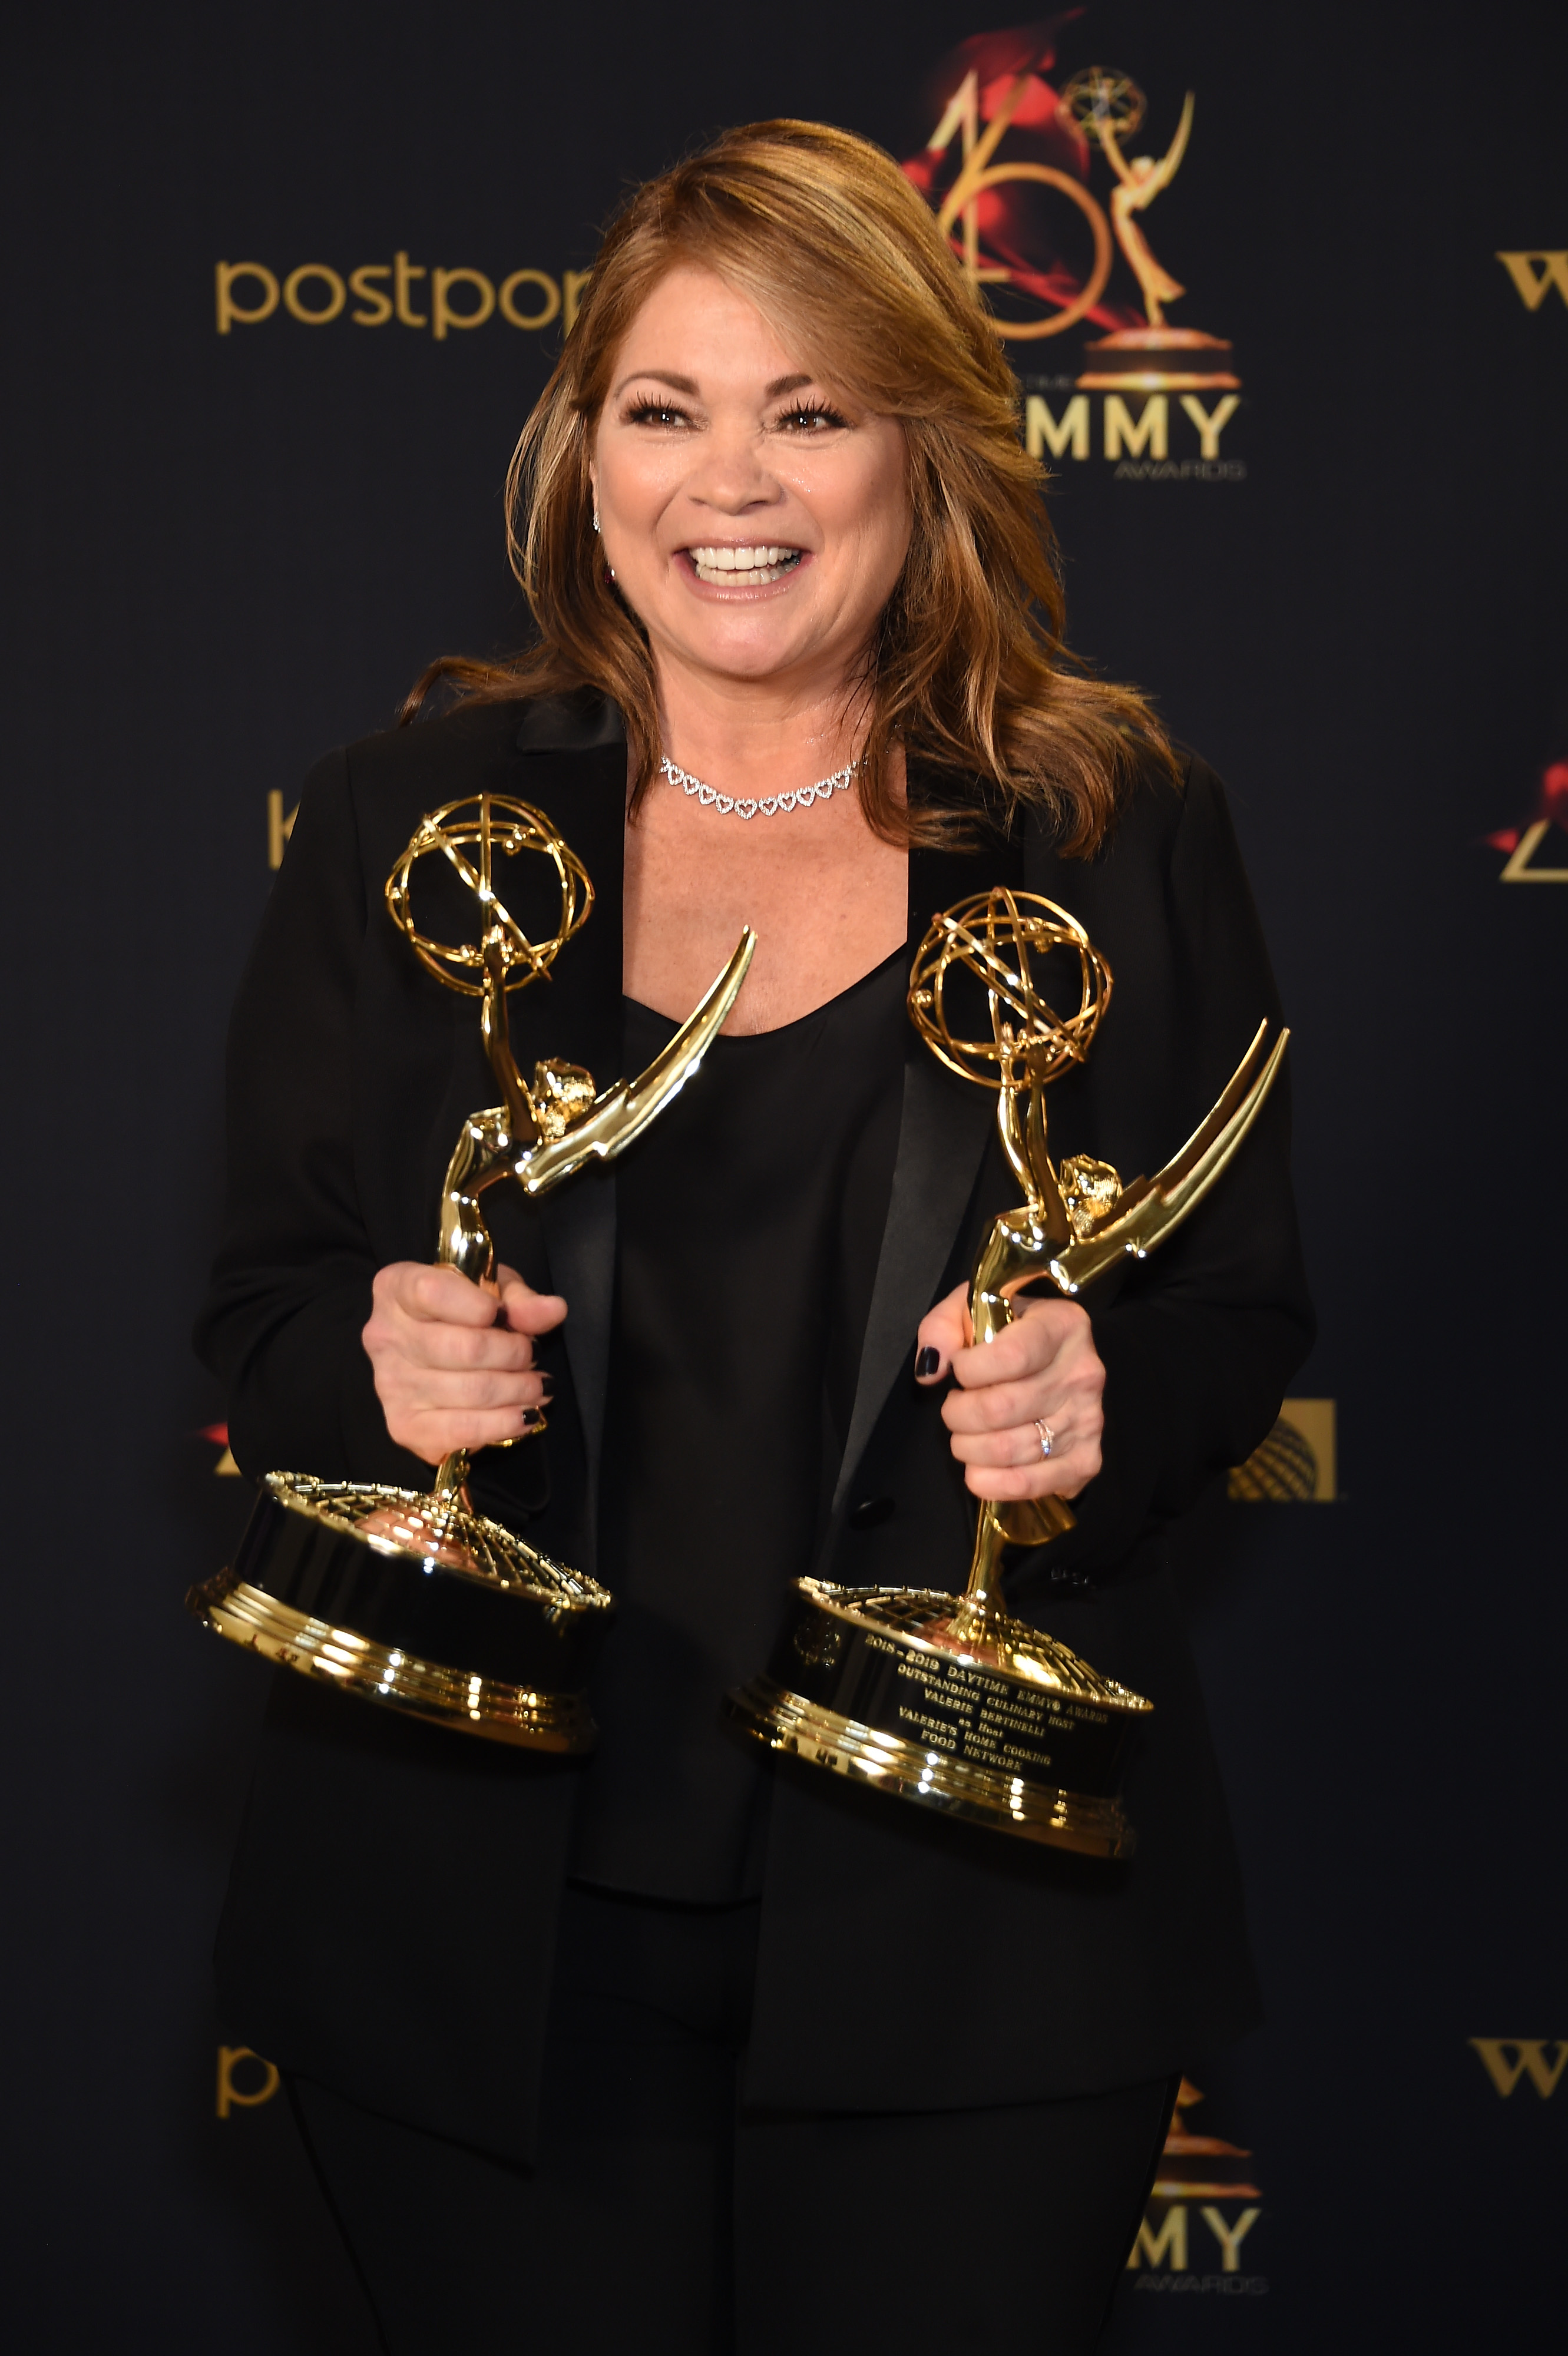 Valerie Bertinelli at the 46th Annual Daytime Emmy Awards in Pasadena, California on May 5, 2019 | Source: Getty Images